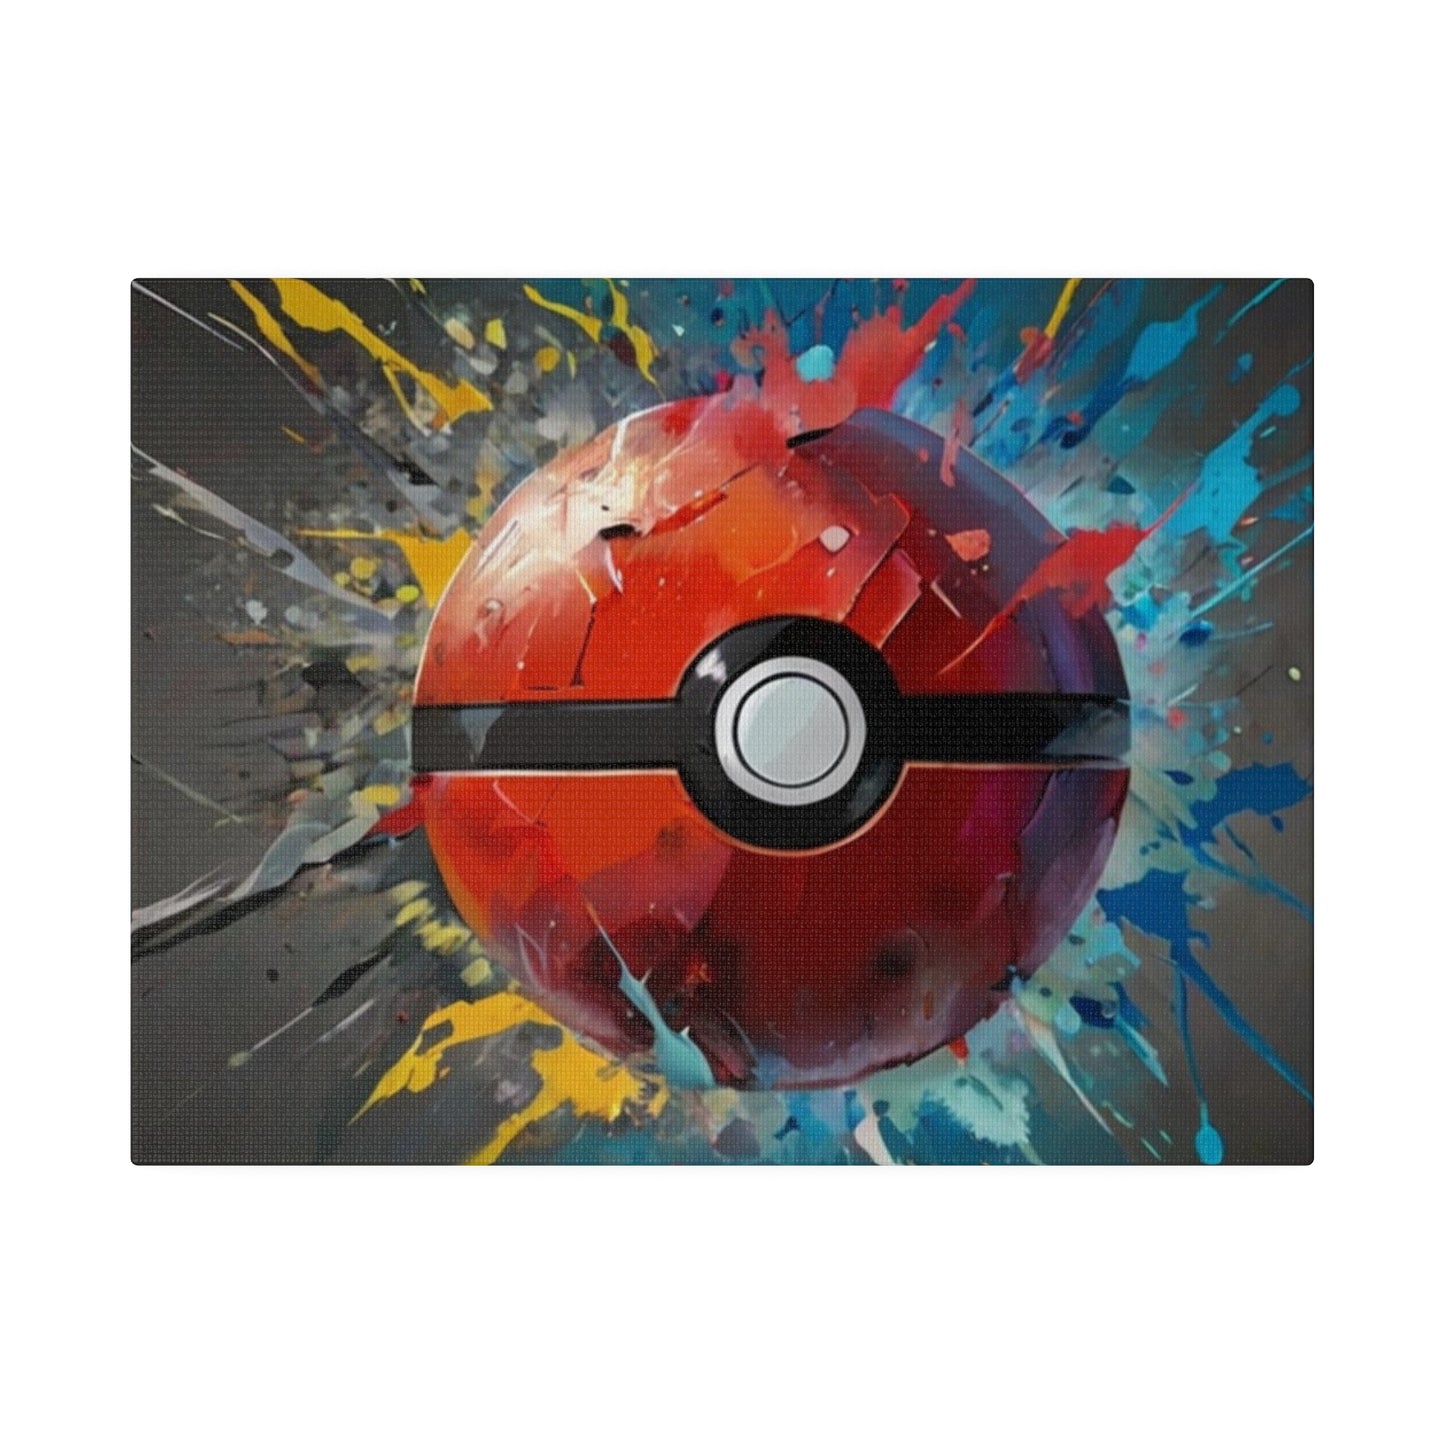 Shattering Colourful Poke-Ball - Matte Canvas, Stretched, 0.75"